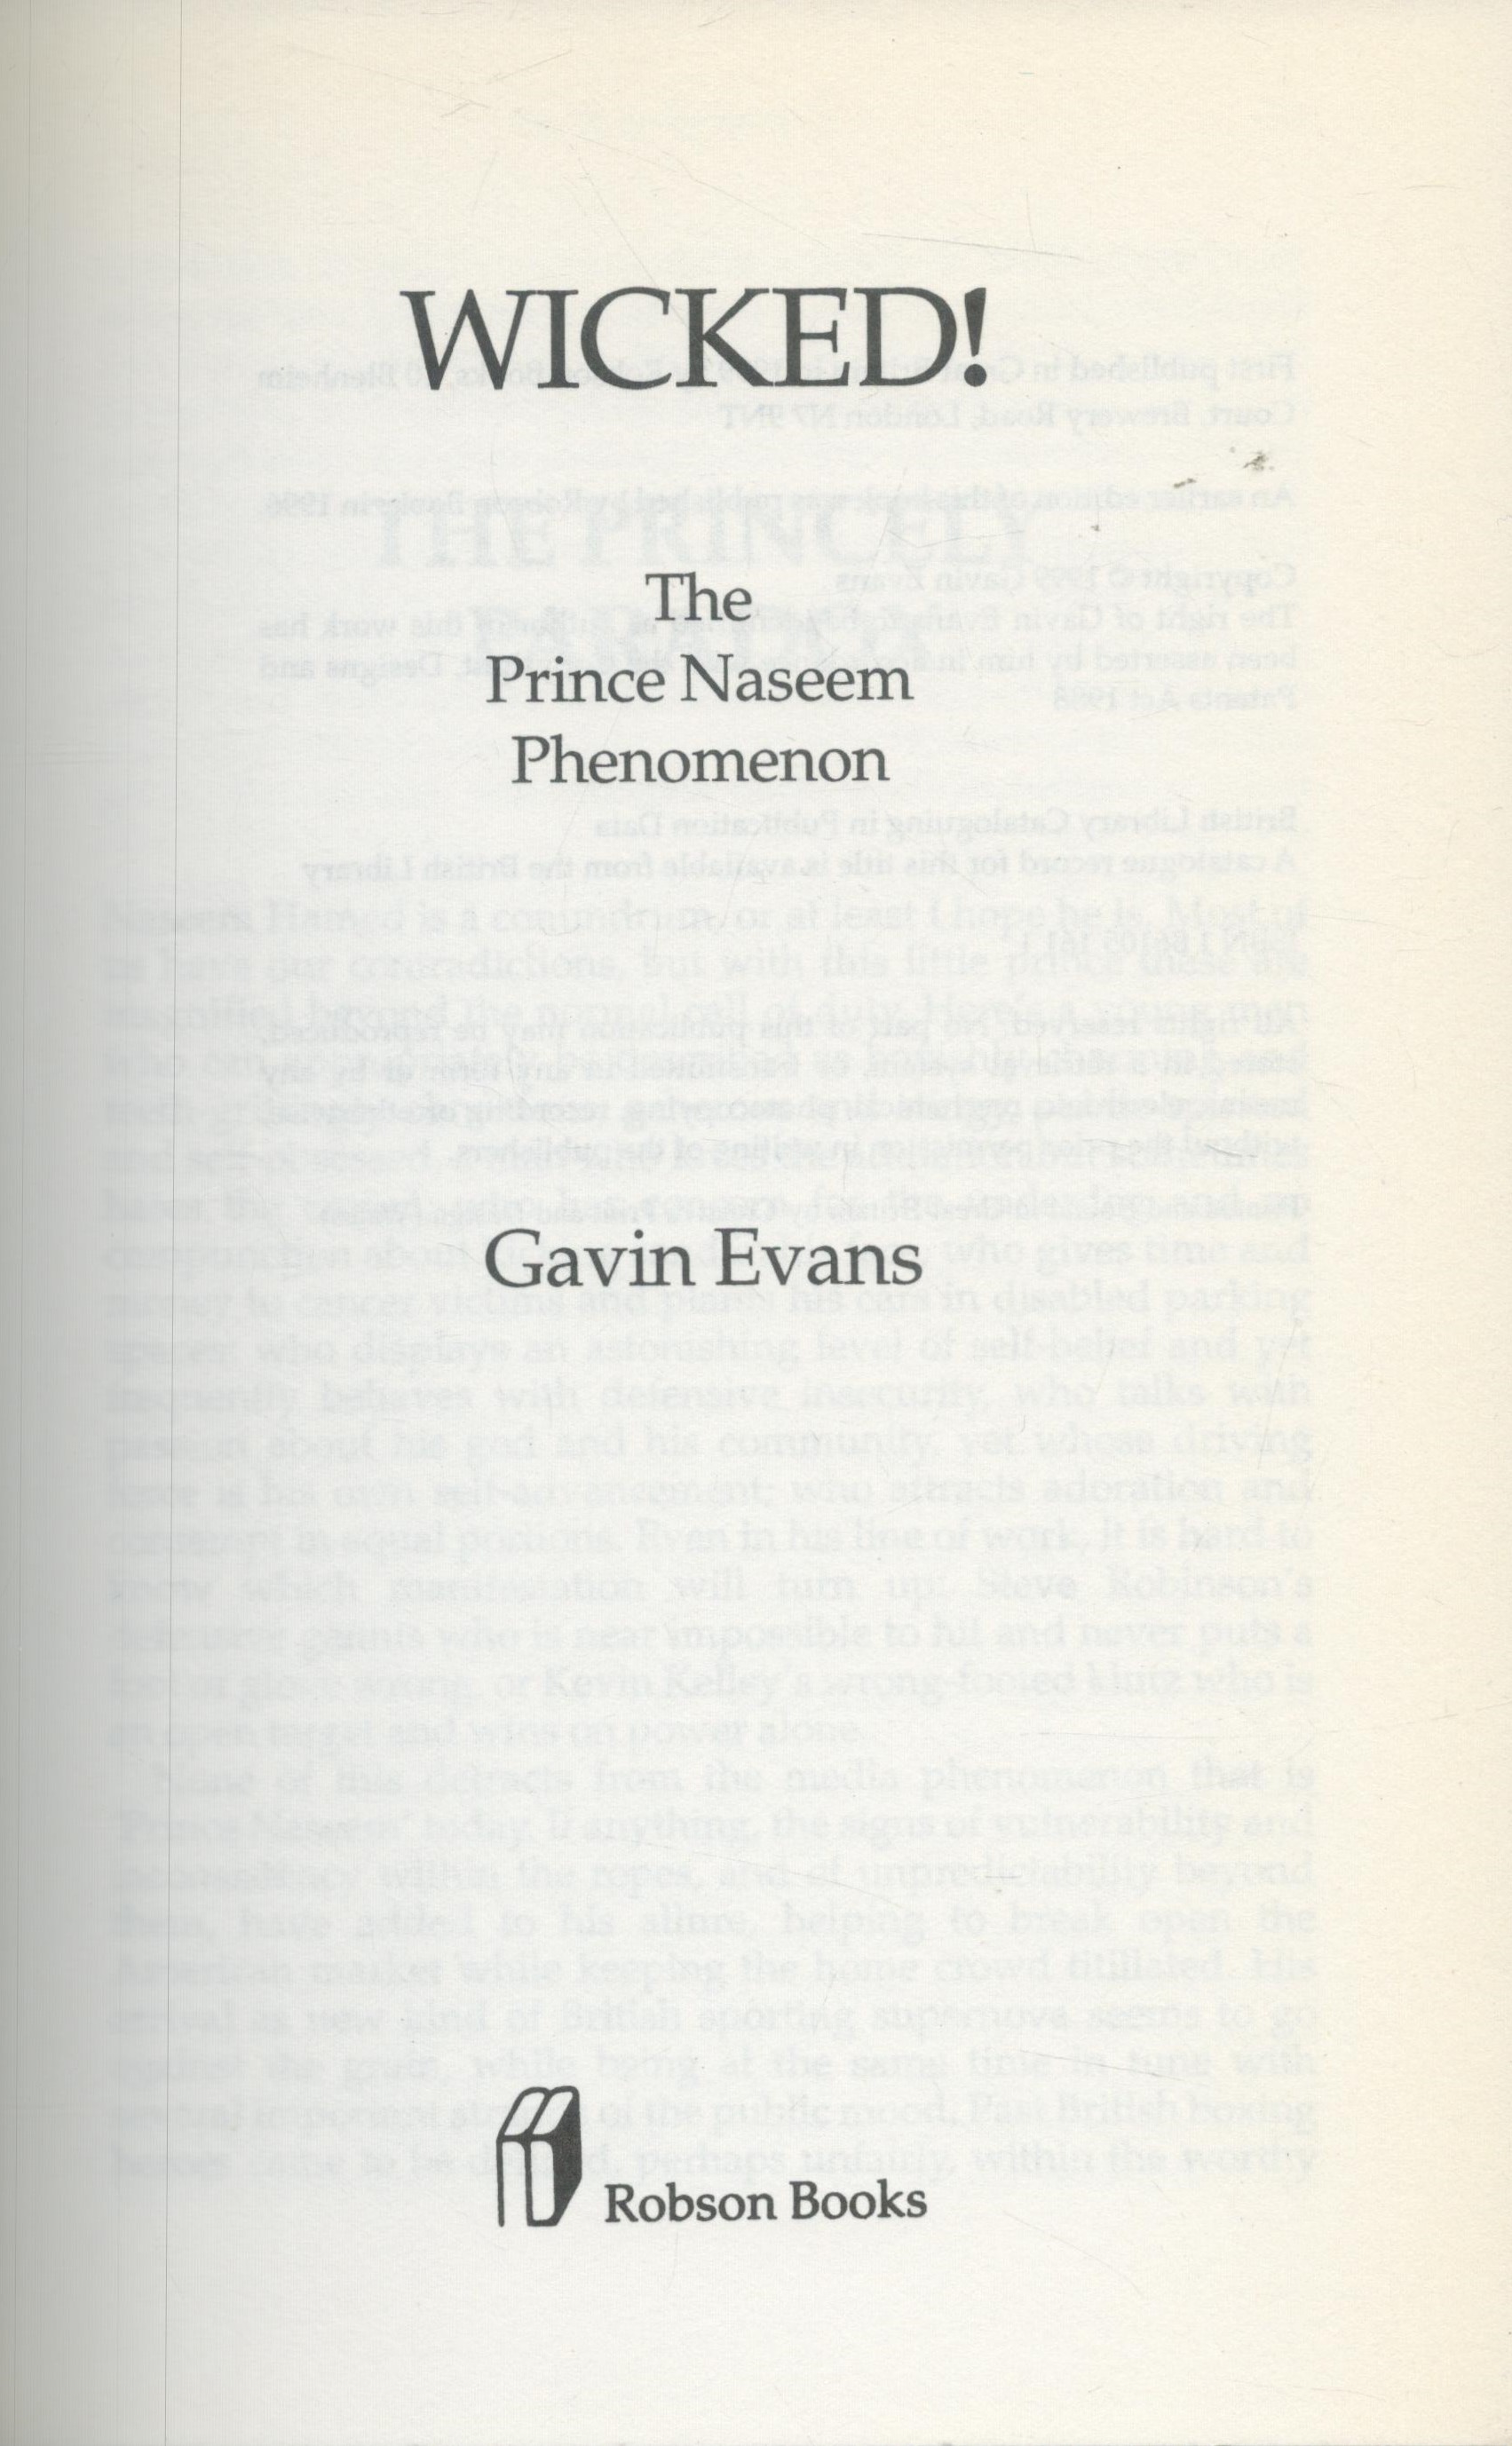 Wicked! The Prince Naseem Phenomenon Gavin Evans Paperback book, 313 pages. Good Condition. All - Bild 2 aus 3